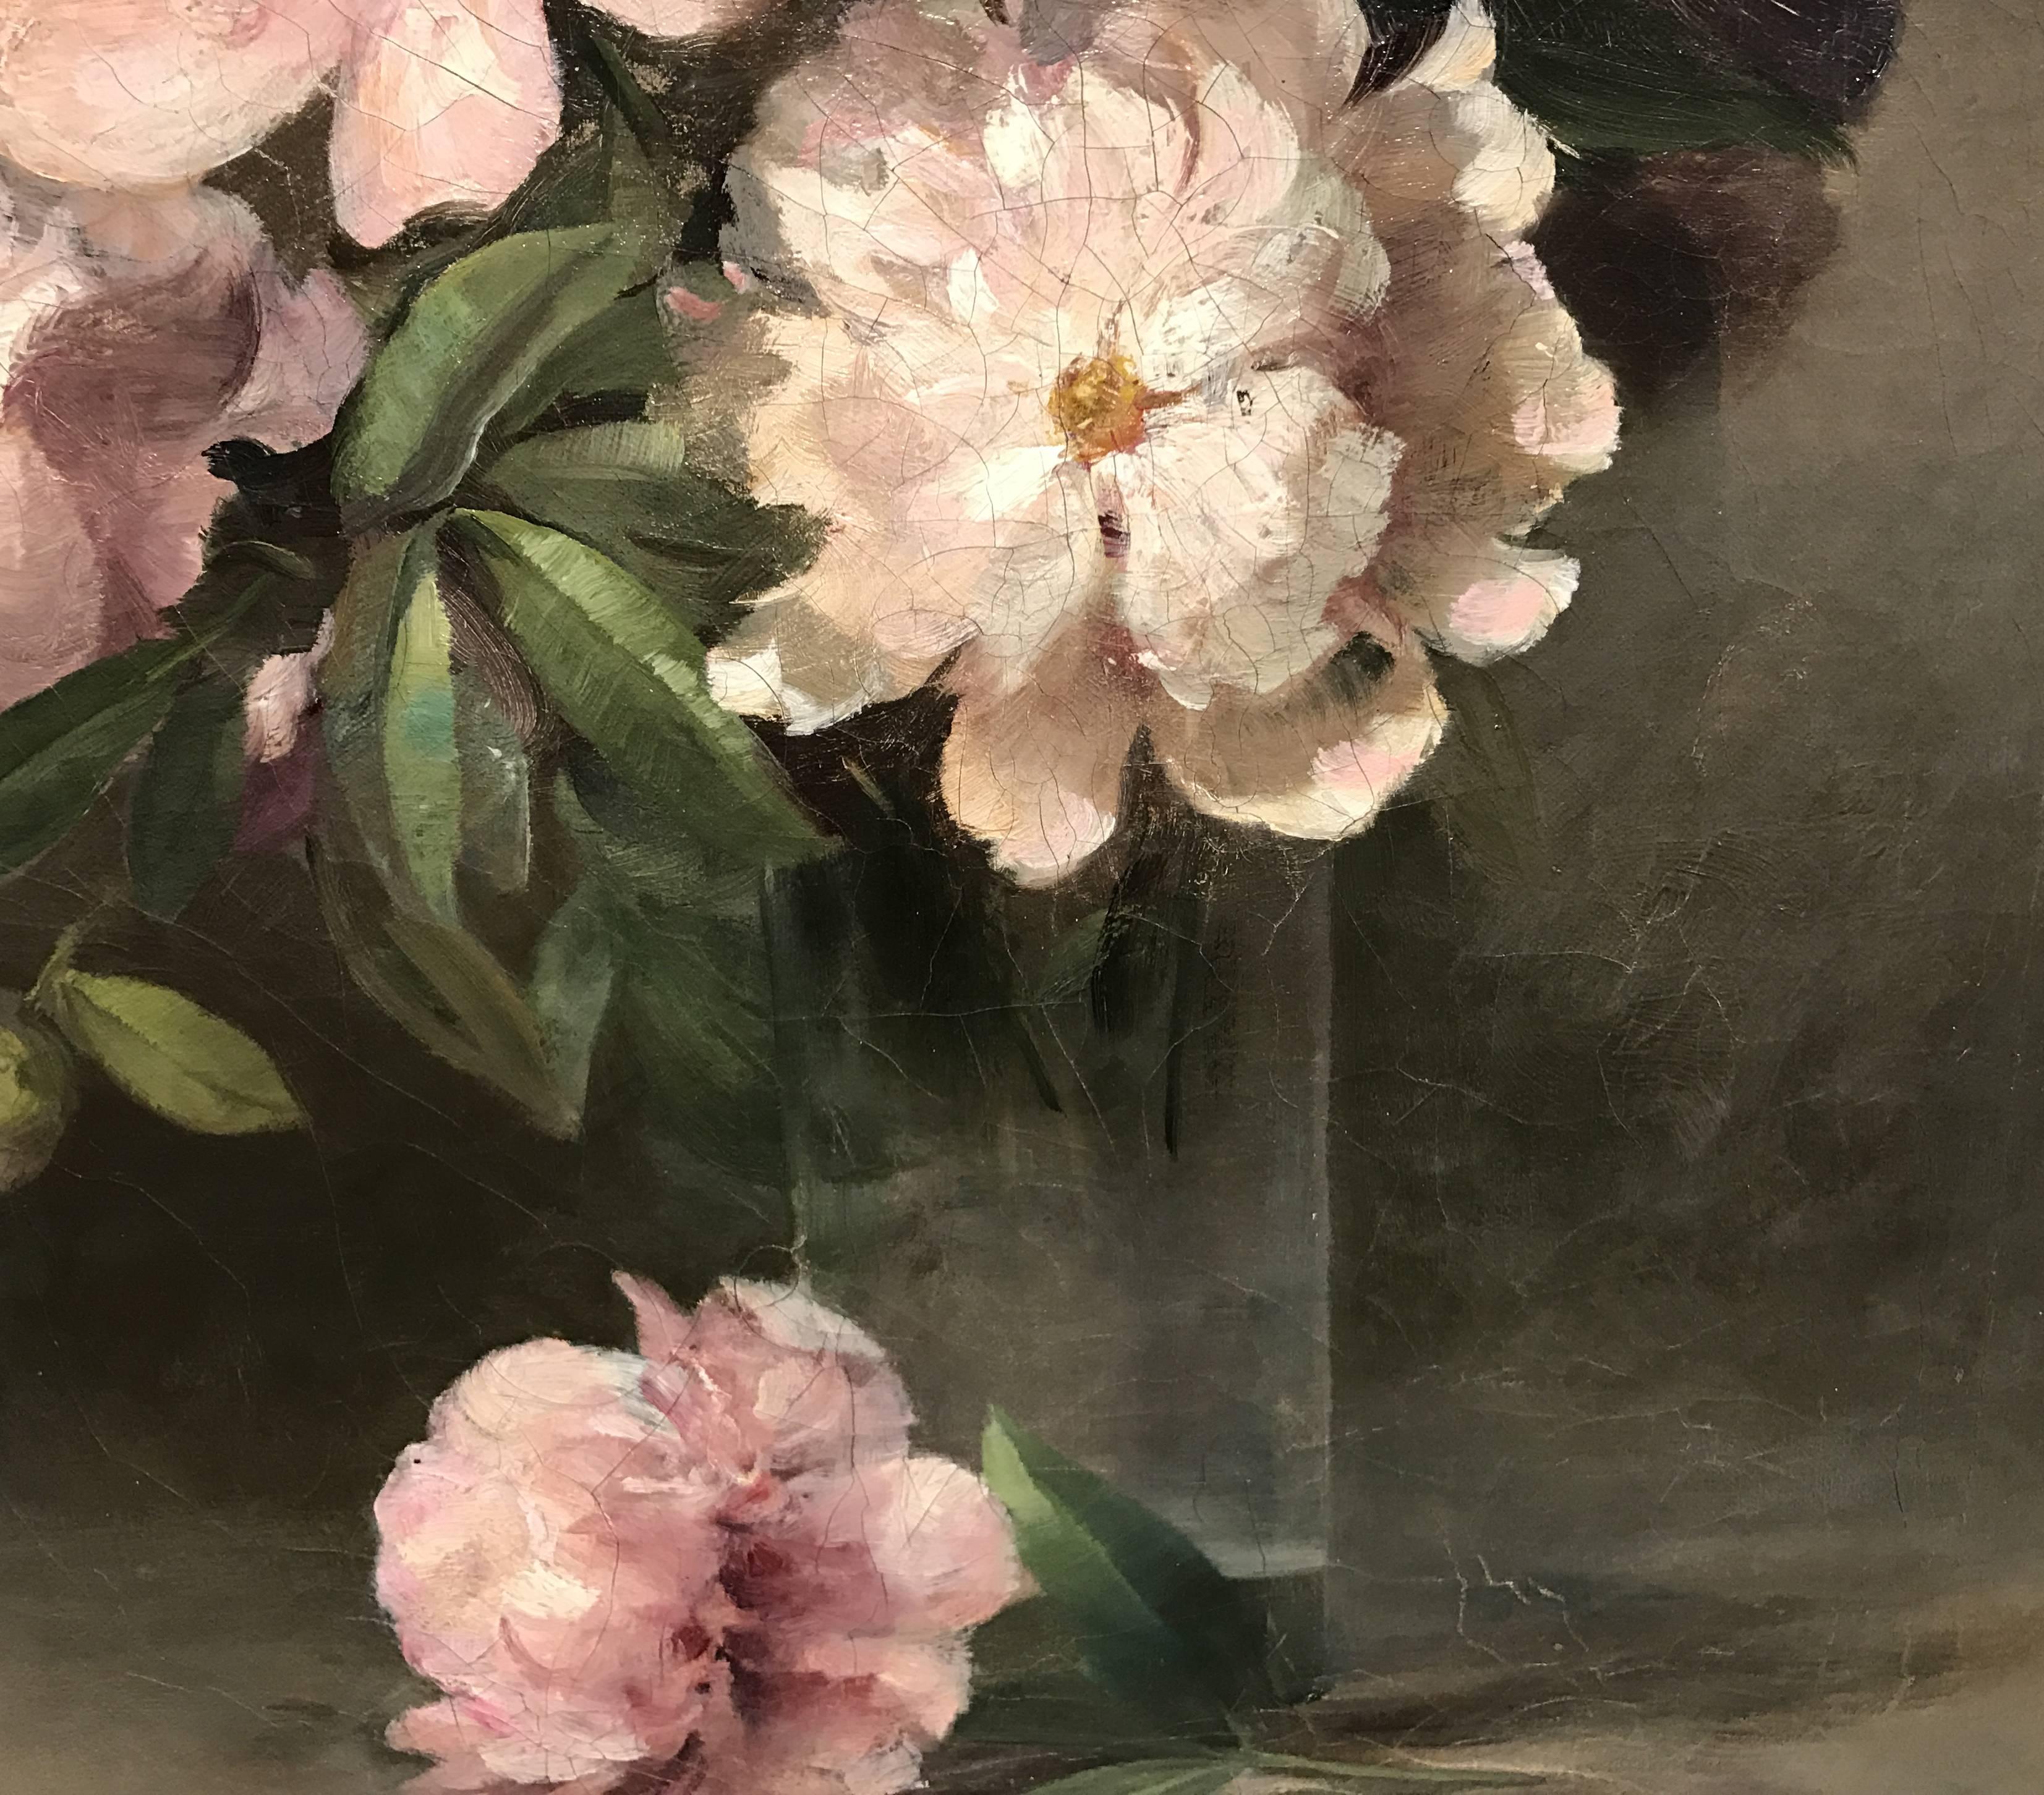 An exceptional oil painting still life of peonies by American artist Abbott Handerson Thayer (1849-1921). Thayer was born in Boston, Massachusetts and began his artistic training under amateur animal painter Henry D. Morse. He later studied at the